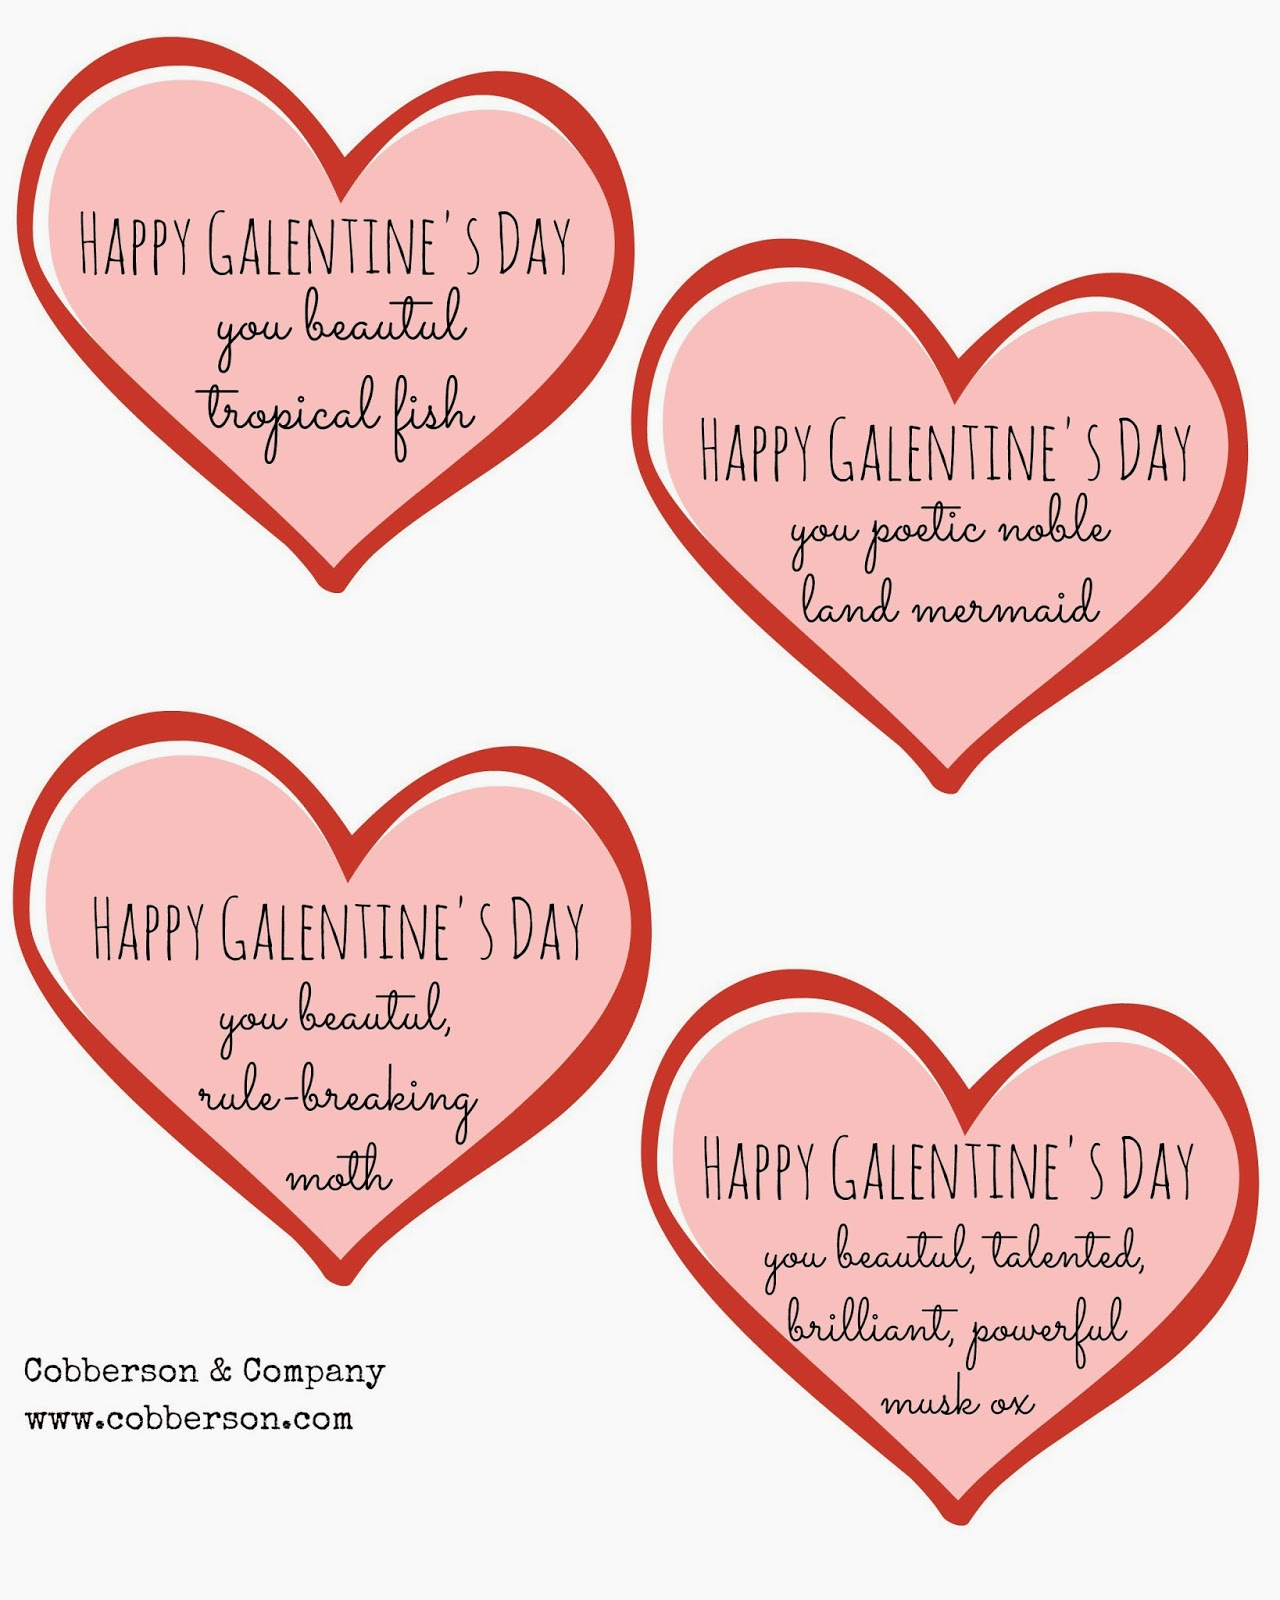 Happy Galentine's Day, you noble DIYer! + Free Printable | Cobberson + Co.